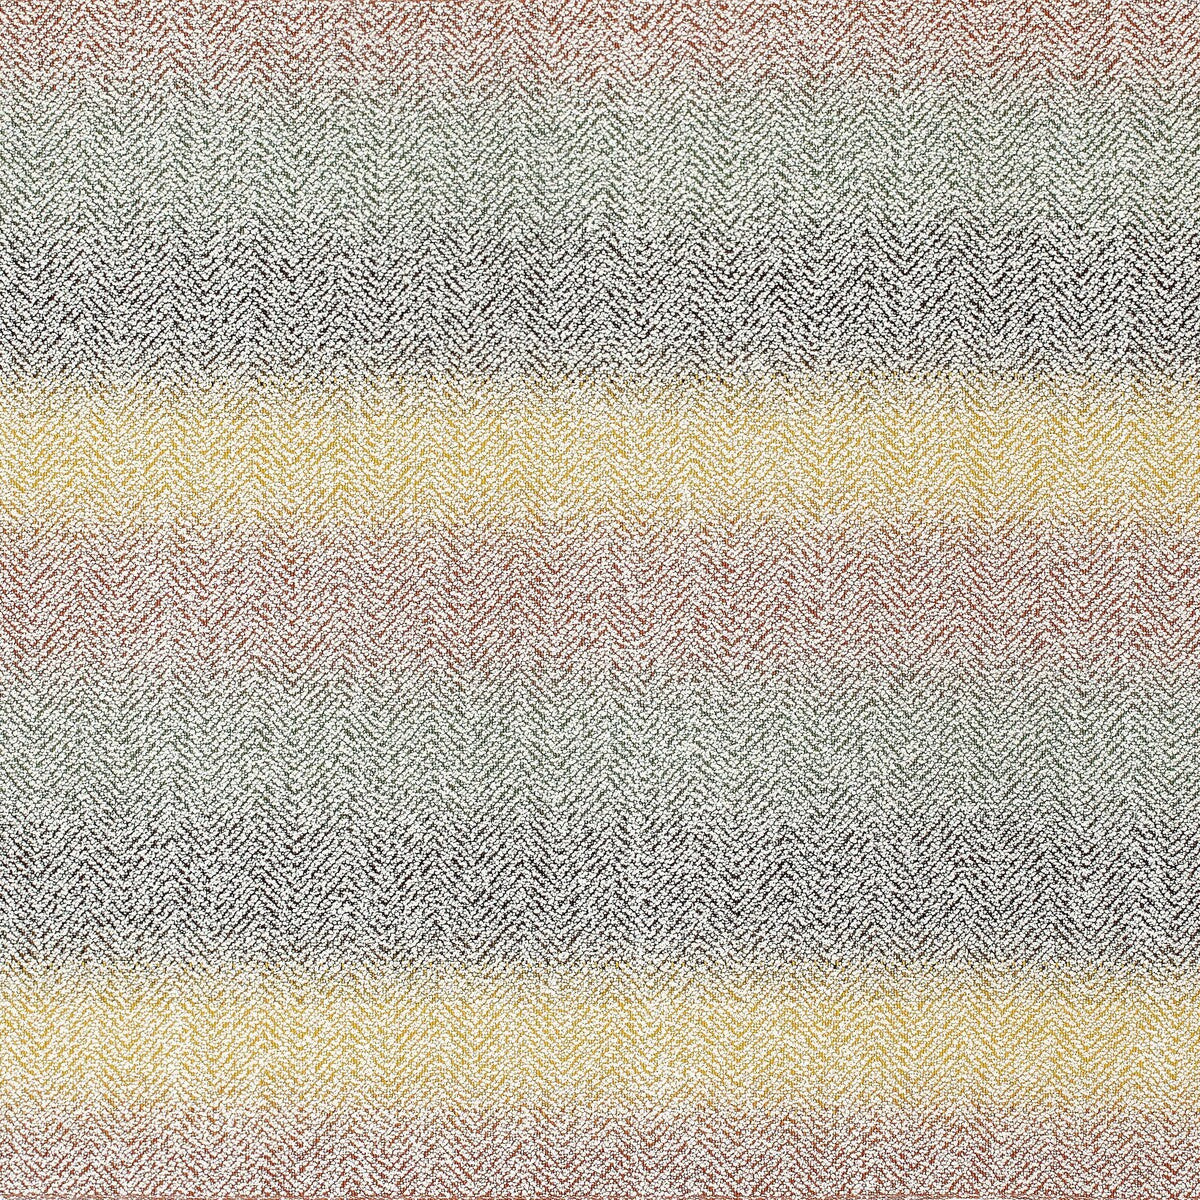 Yzeure fabric in 164 color - pattern 36253.194.0 - by Kravet Couture in the Missoni Home 2020 collection